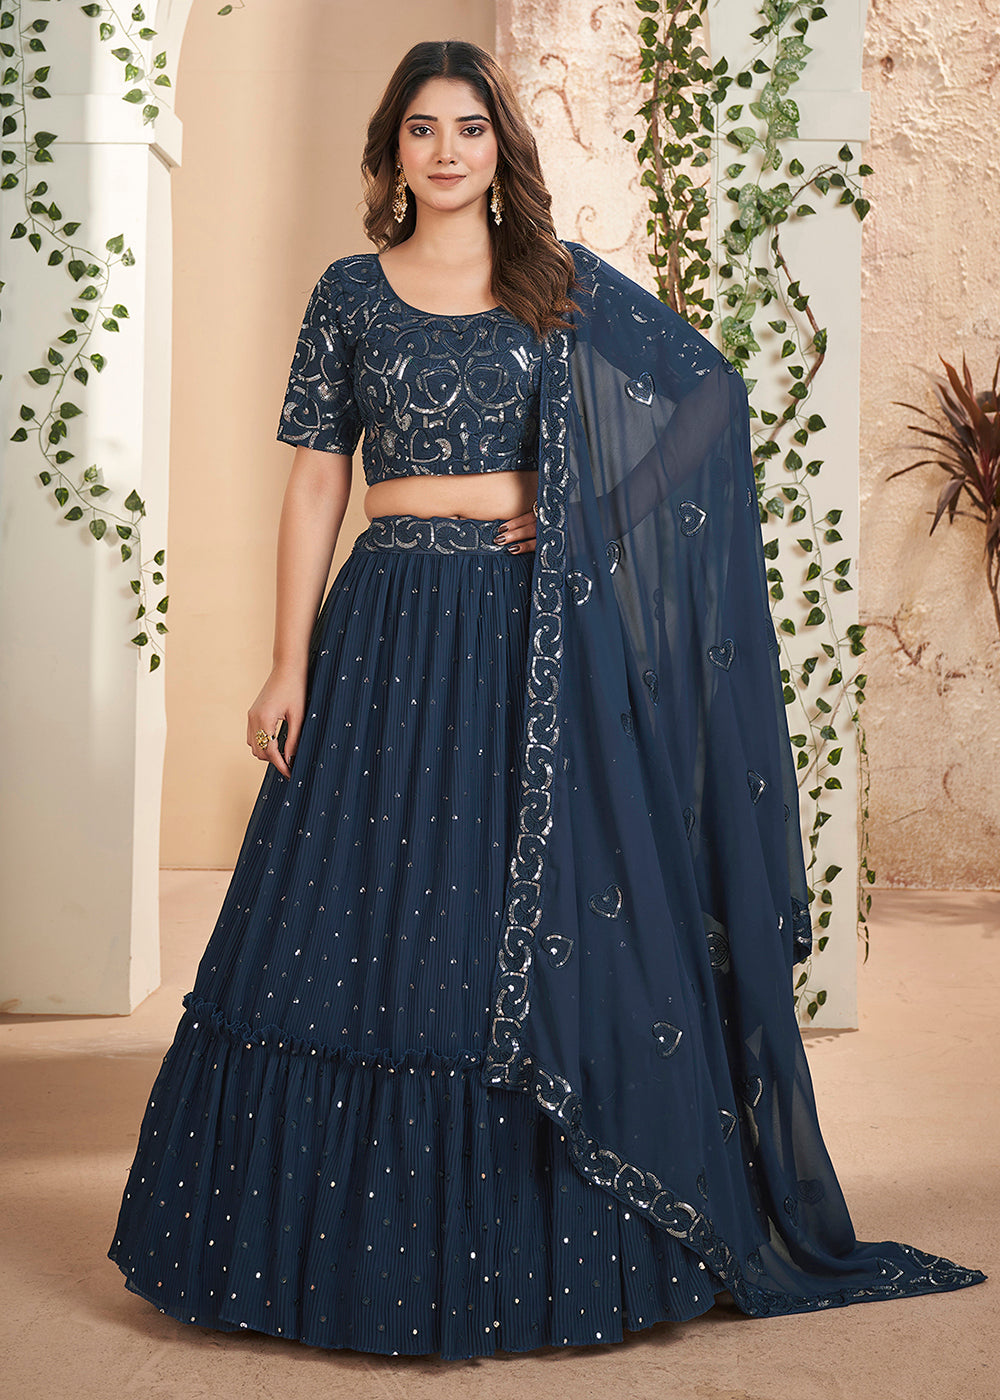 Buy Now Blue Thread & Sequins Wedding Party Lehenga Choli Online in USA, UK, Canada & Worldwide at Empress Clothing.